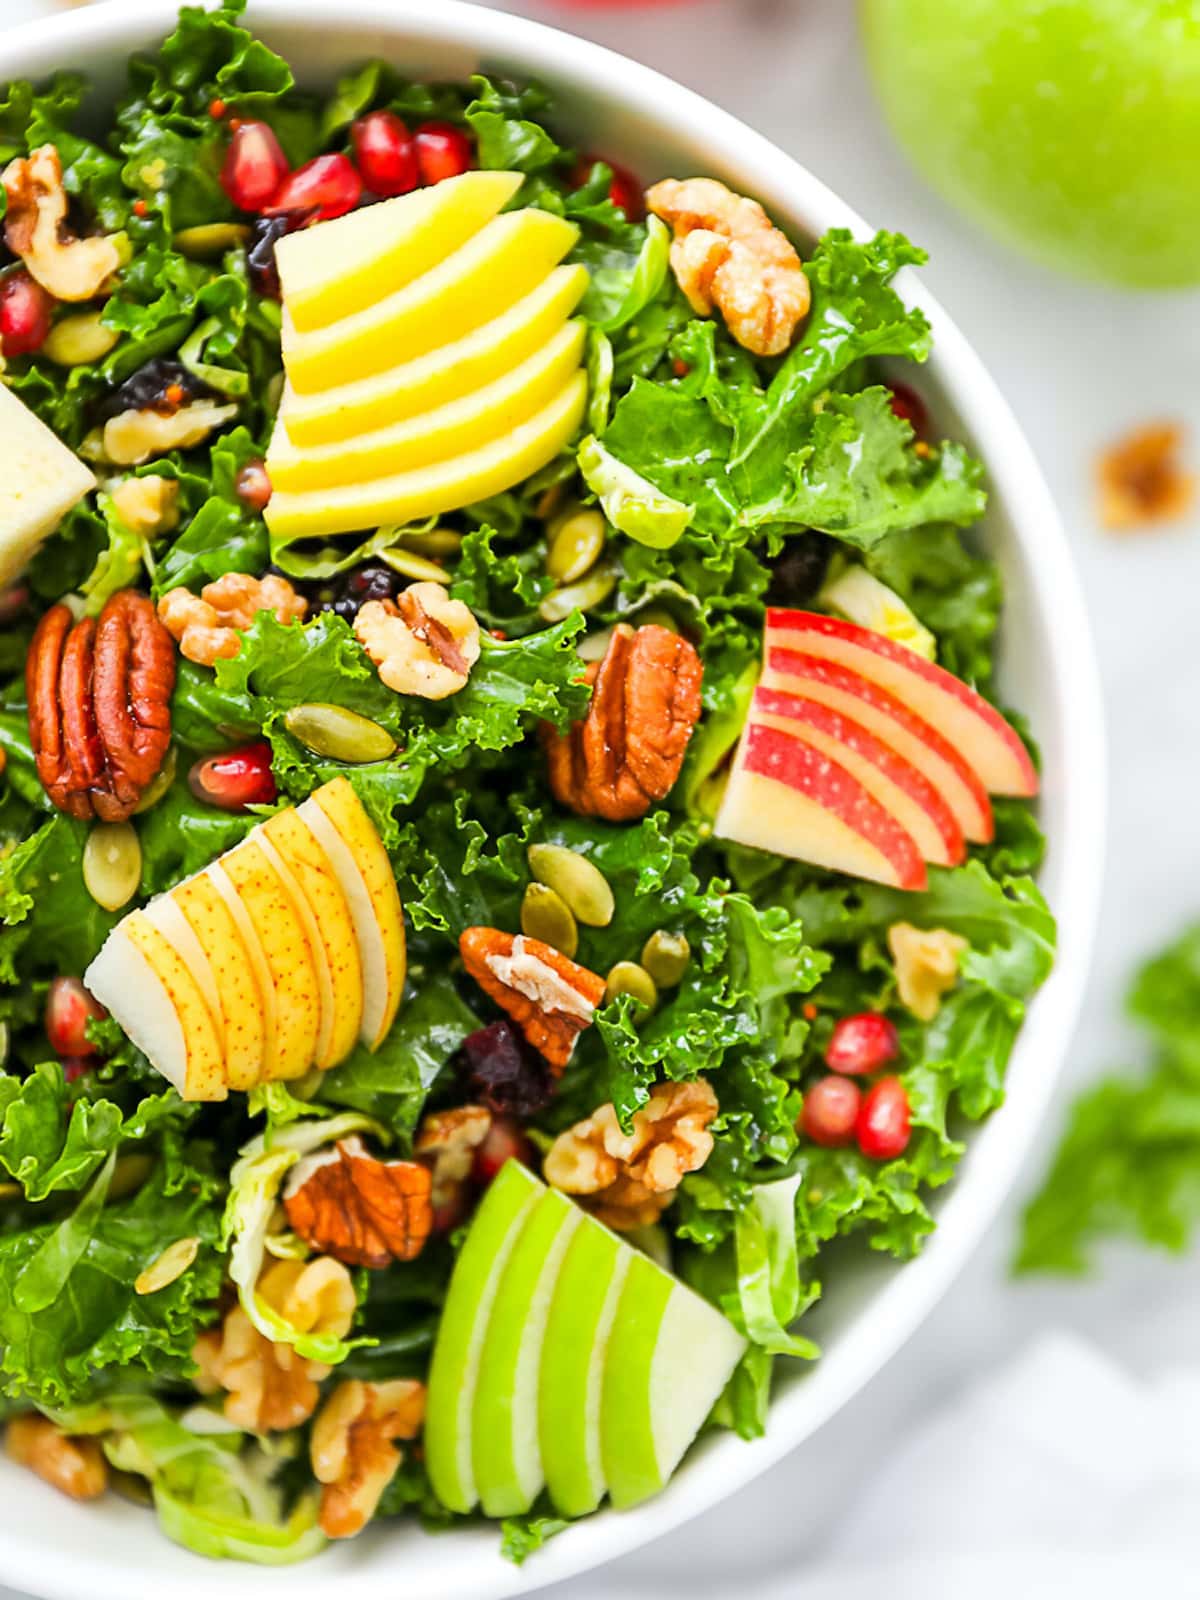 A large kale salad with apples, pears, walnuts, pecans, pomegranate seeds.